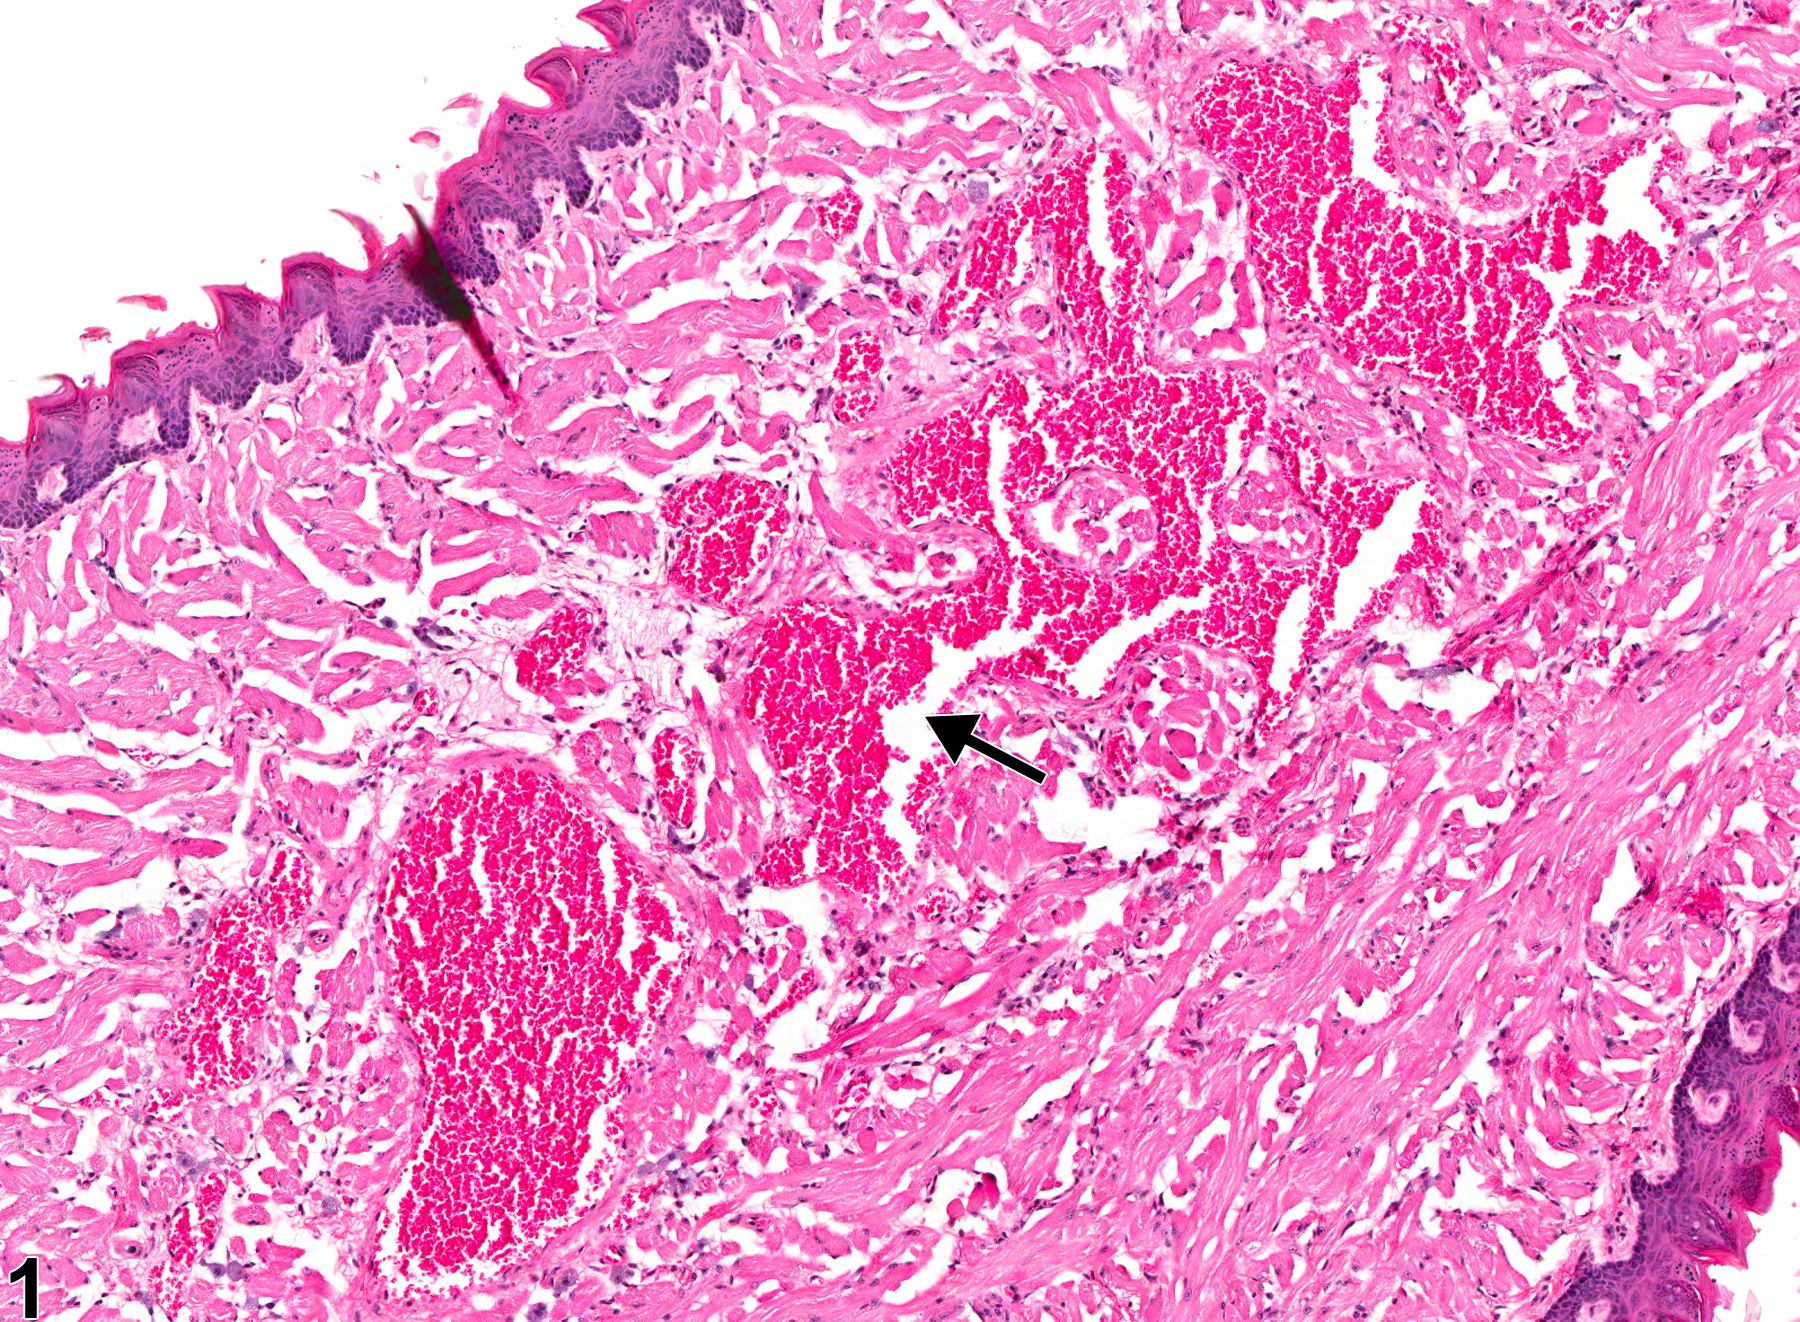 Image of angiectasis in the tongue from a female B6C3F1 mouse in a chronic study